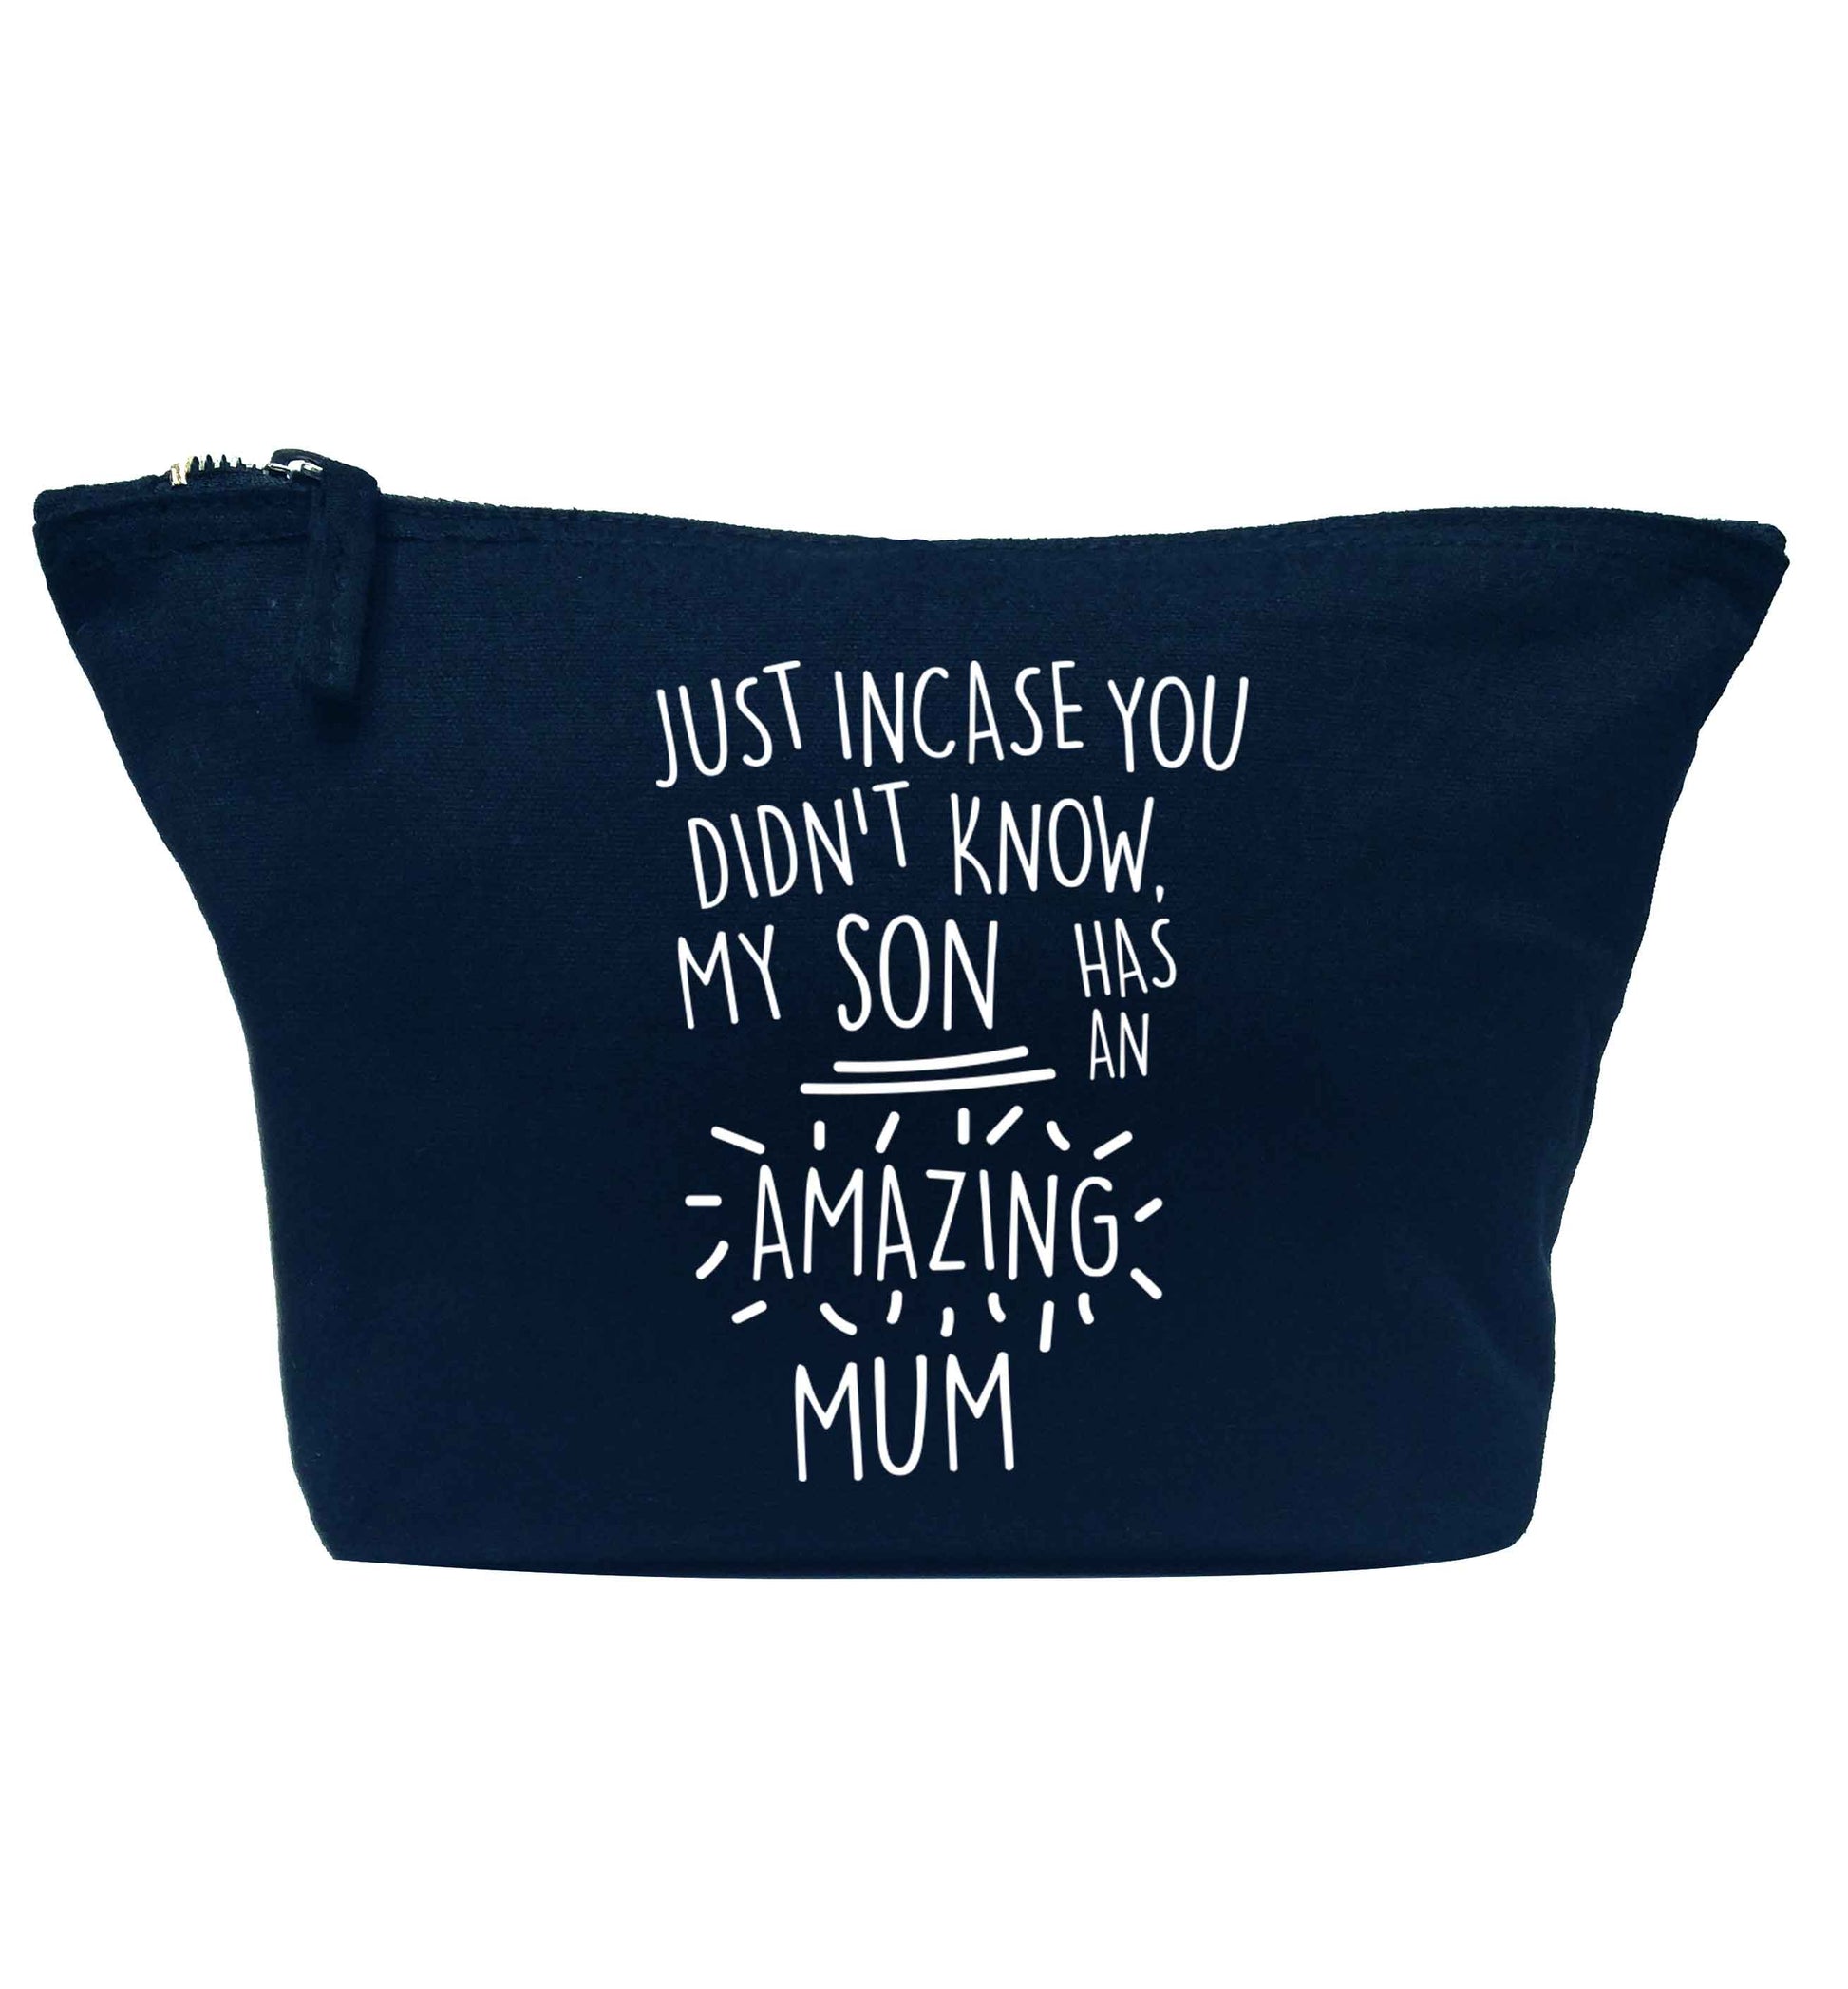 Just incase you didn't know my son has an amazing mum navy makeup bag